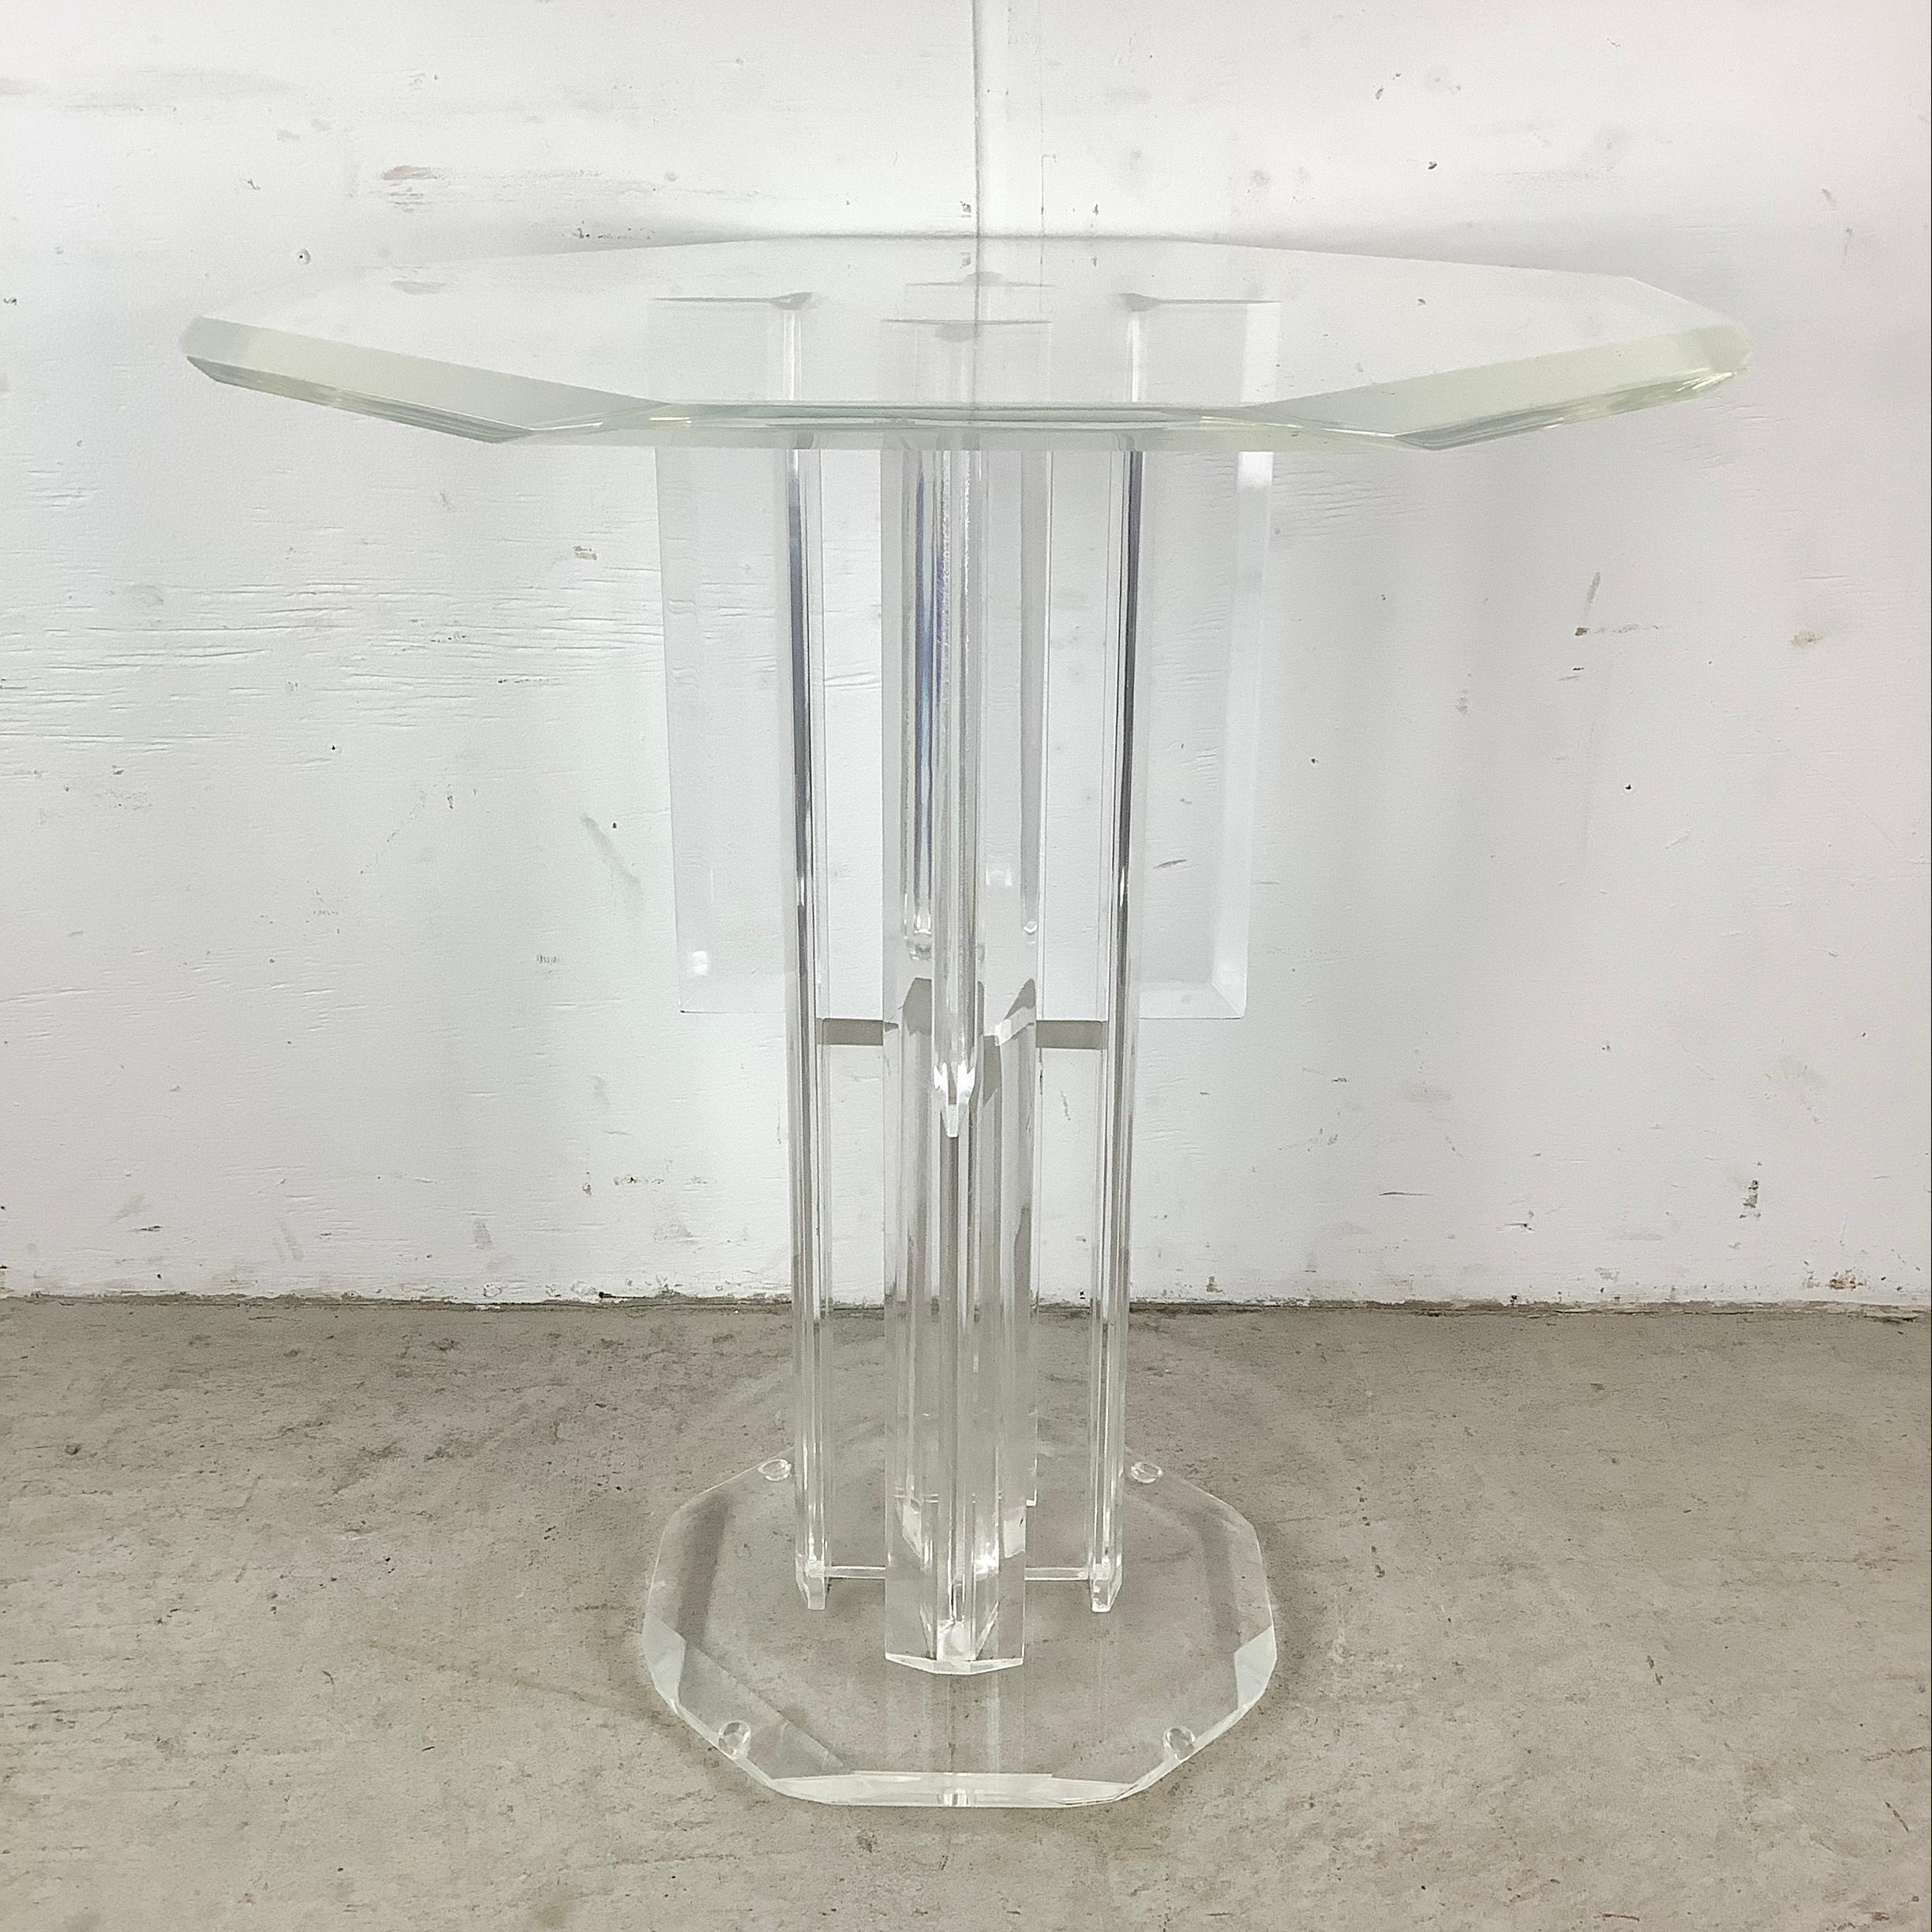 Elevate your space with this vintage lucite pedestal table, an embodiment of modern elegance and versatility. This eight-sided pedestal, crafted from high-quality lucite, shines with a clarity and sophistication unique to vintage modern furniture.